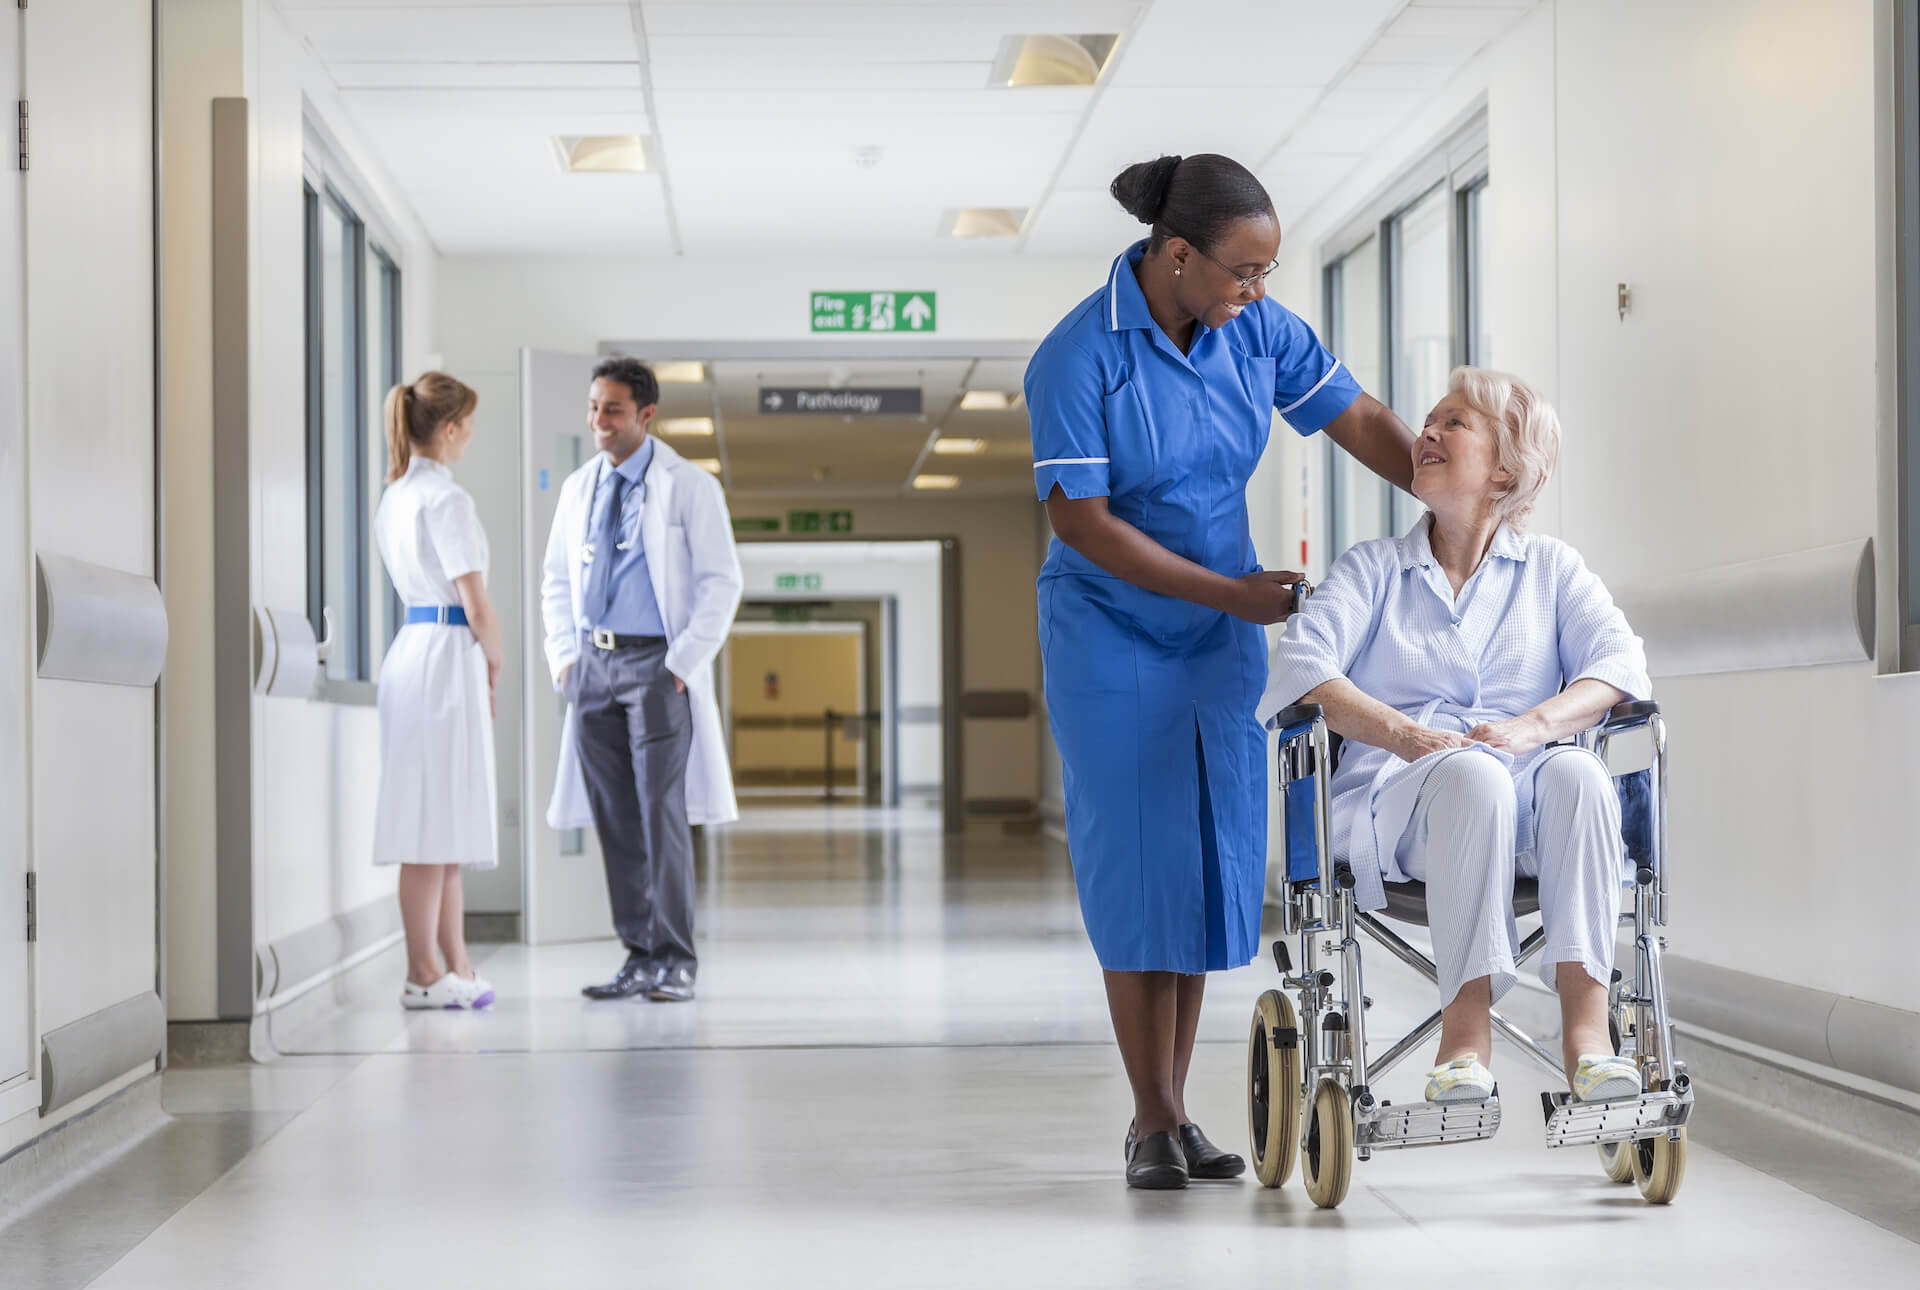 Image for healthcare assistant staffing agency